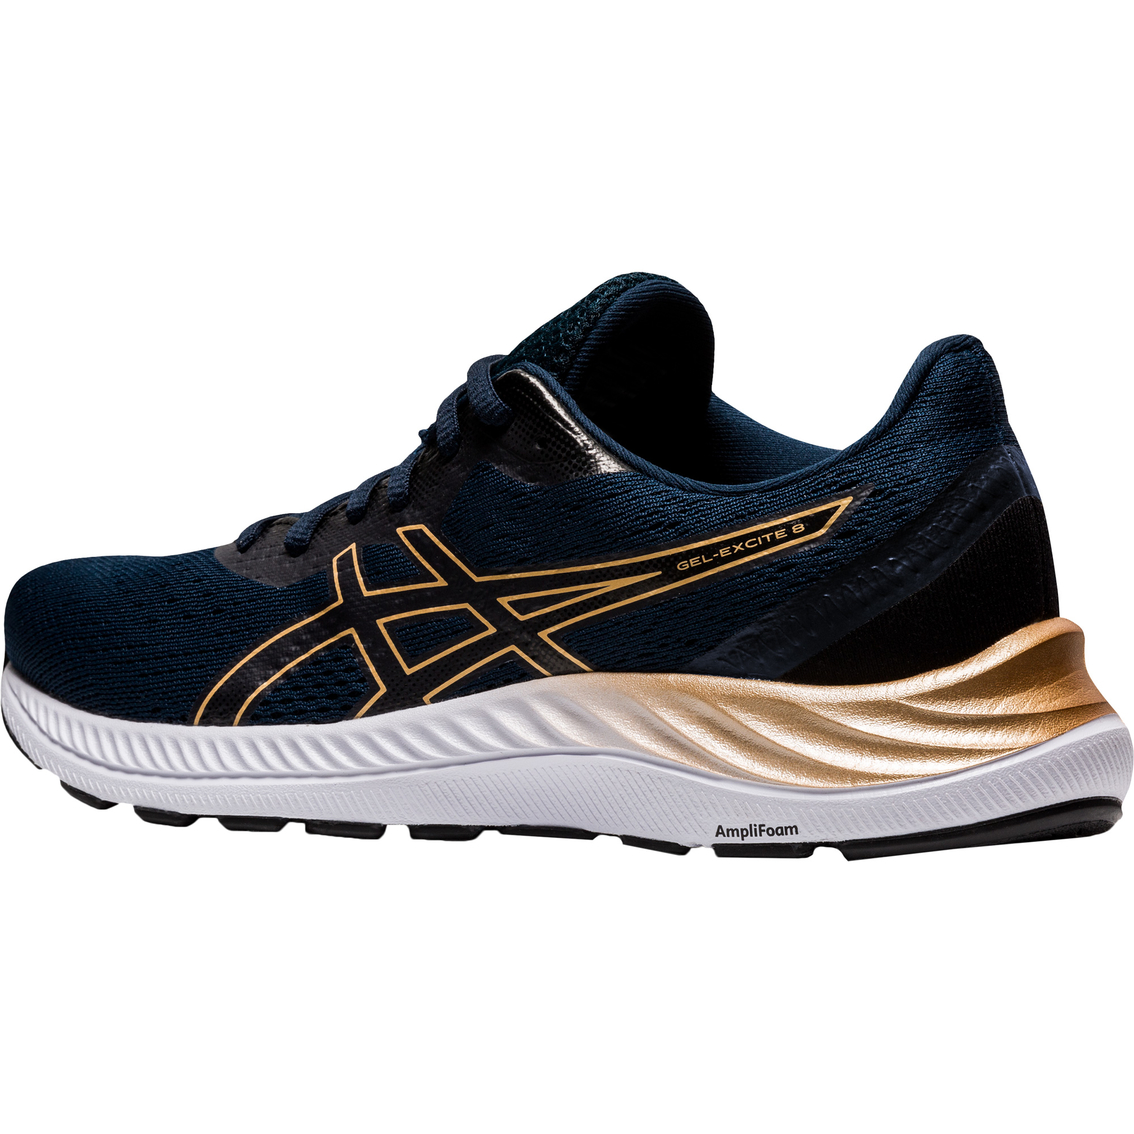 ASICS Women's Gel Excite 8 Running Shoes - Image 7 of 7